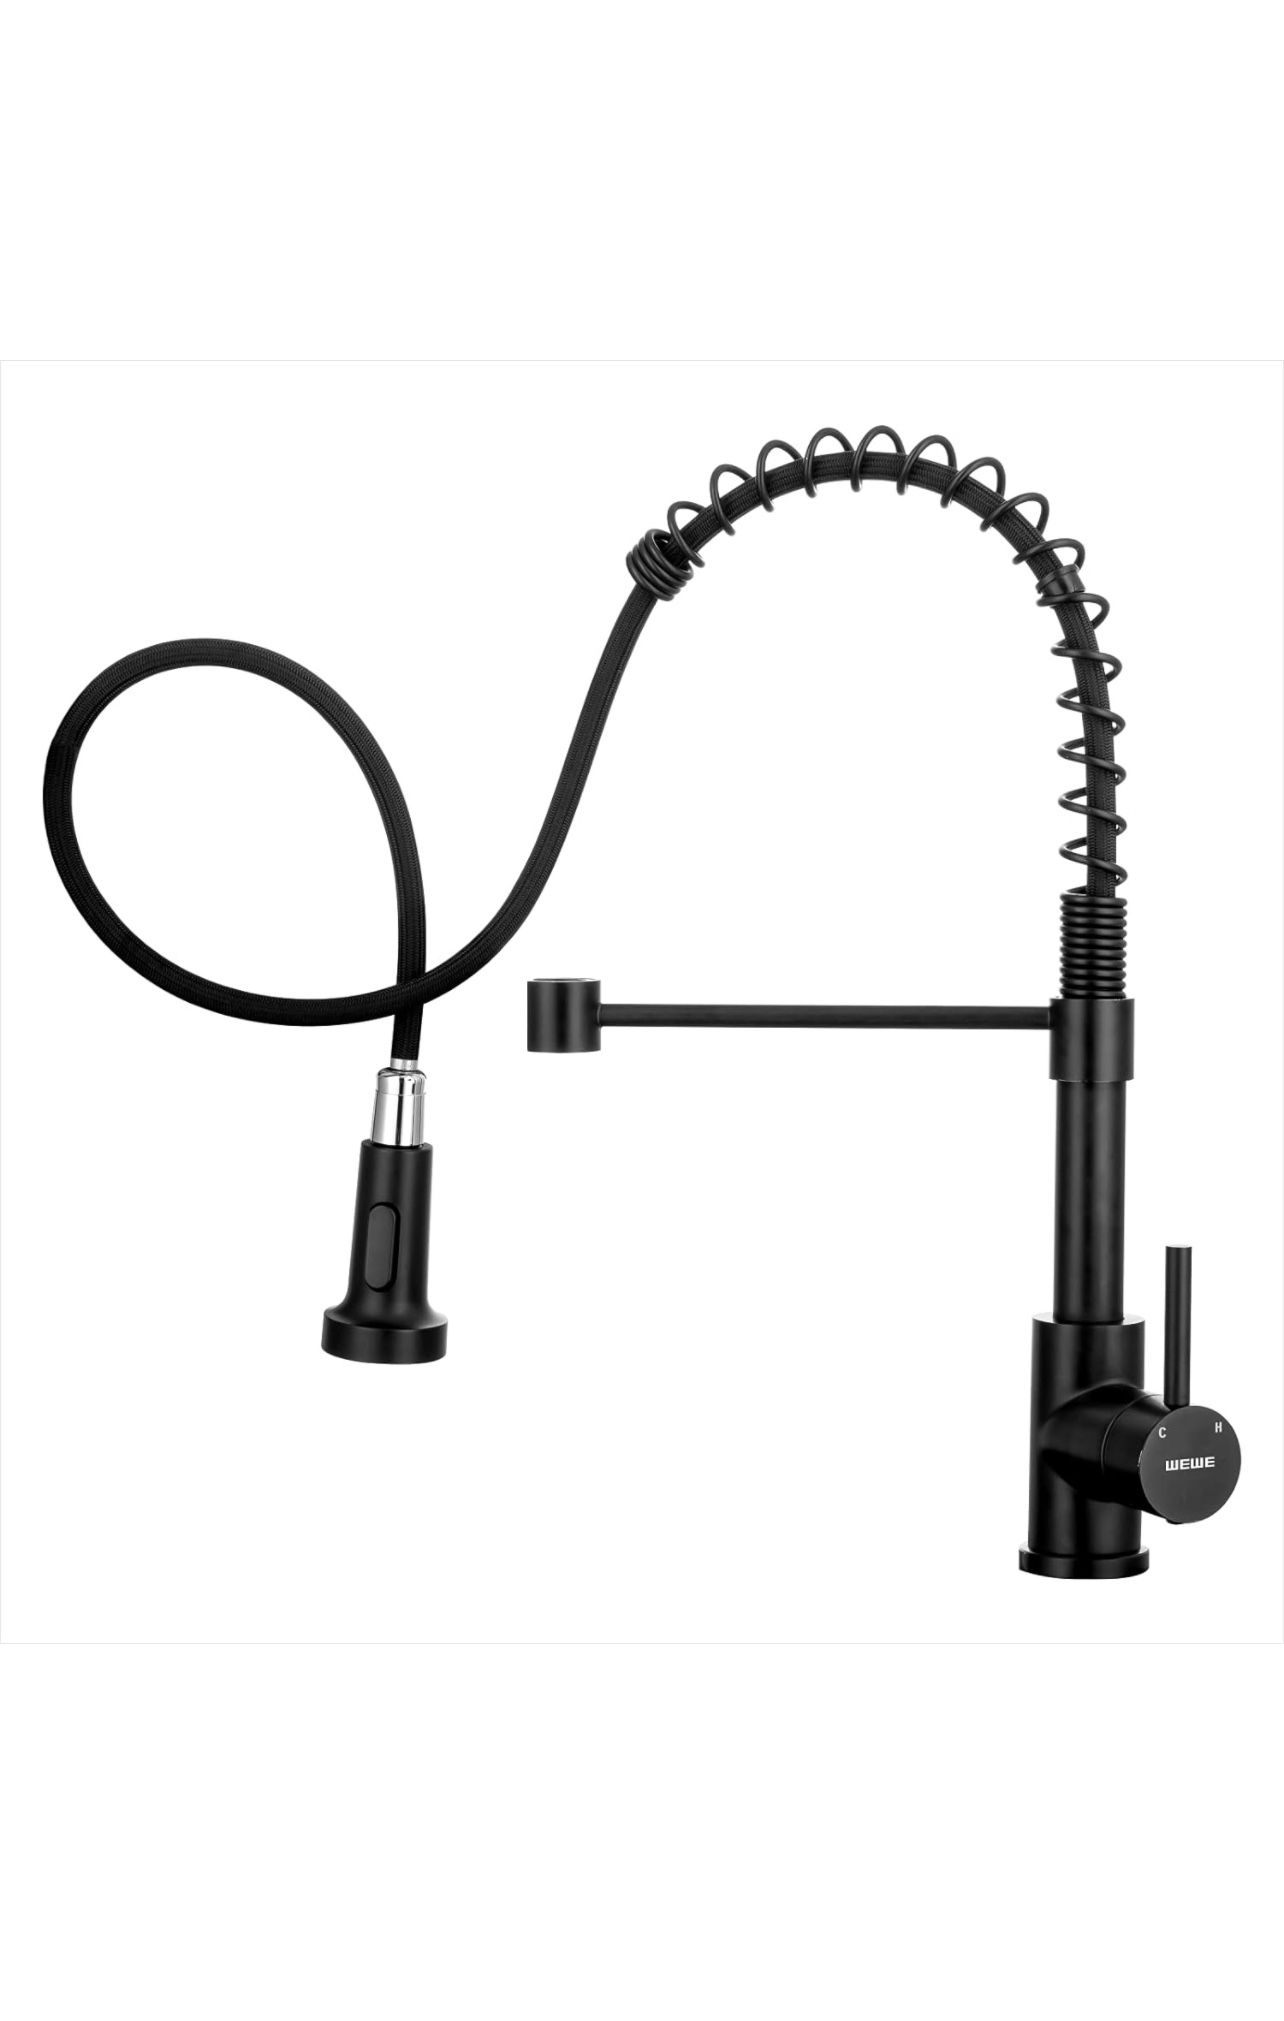 WEWE Kitchen Faucet Black Stainless Steel Commercial Spring Kitchen Faucet with Pull Down Sprayer